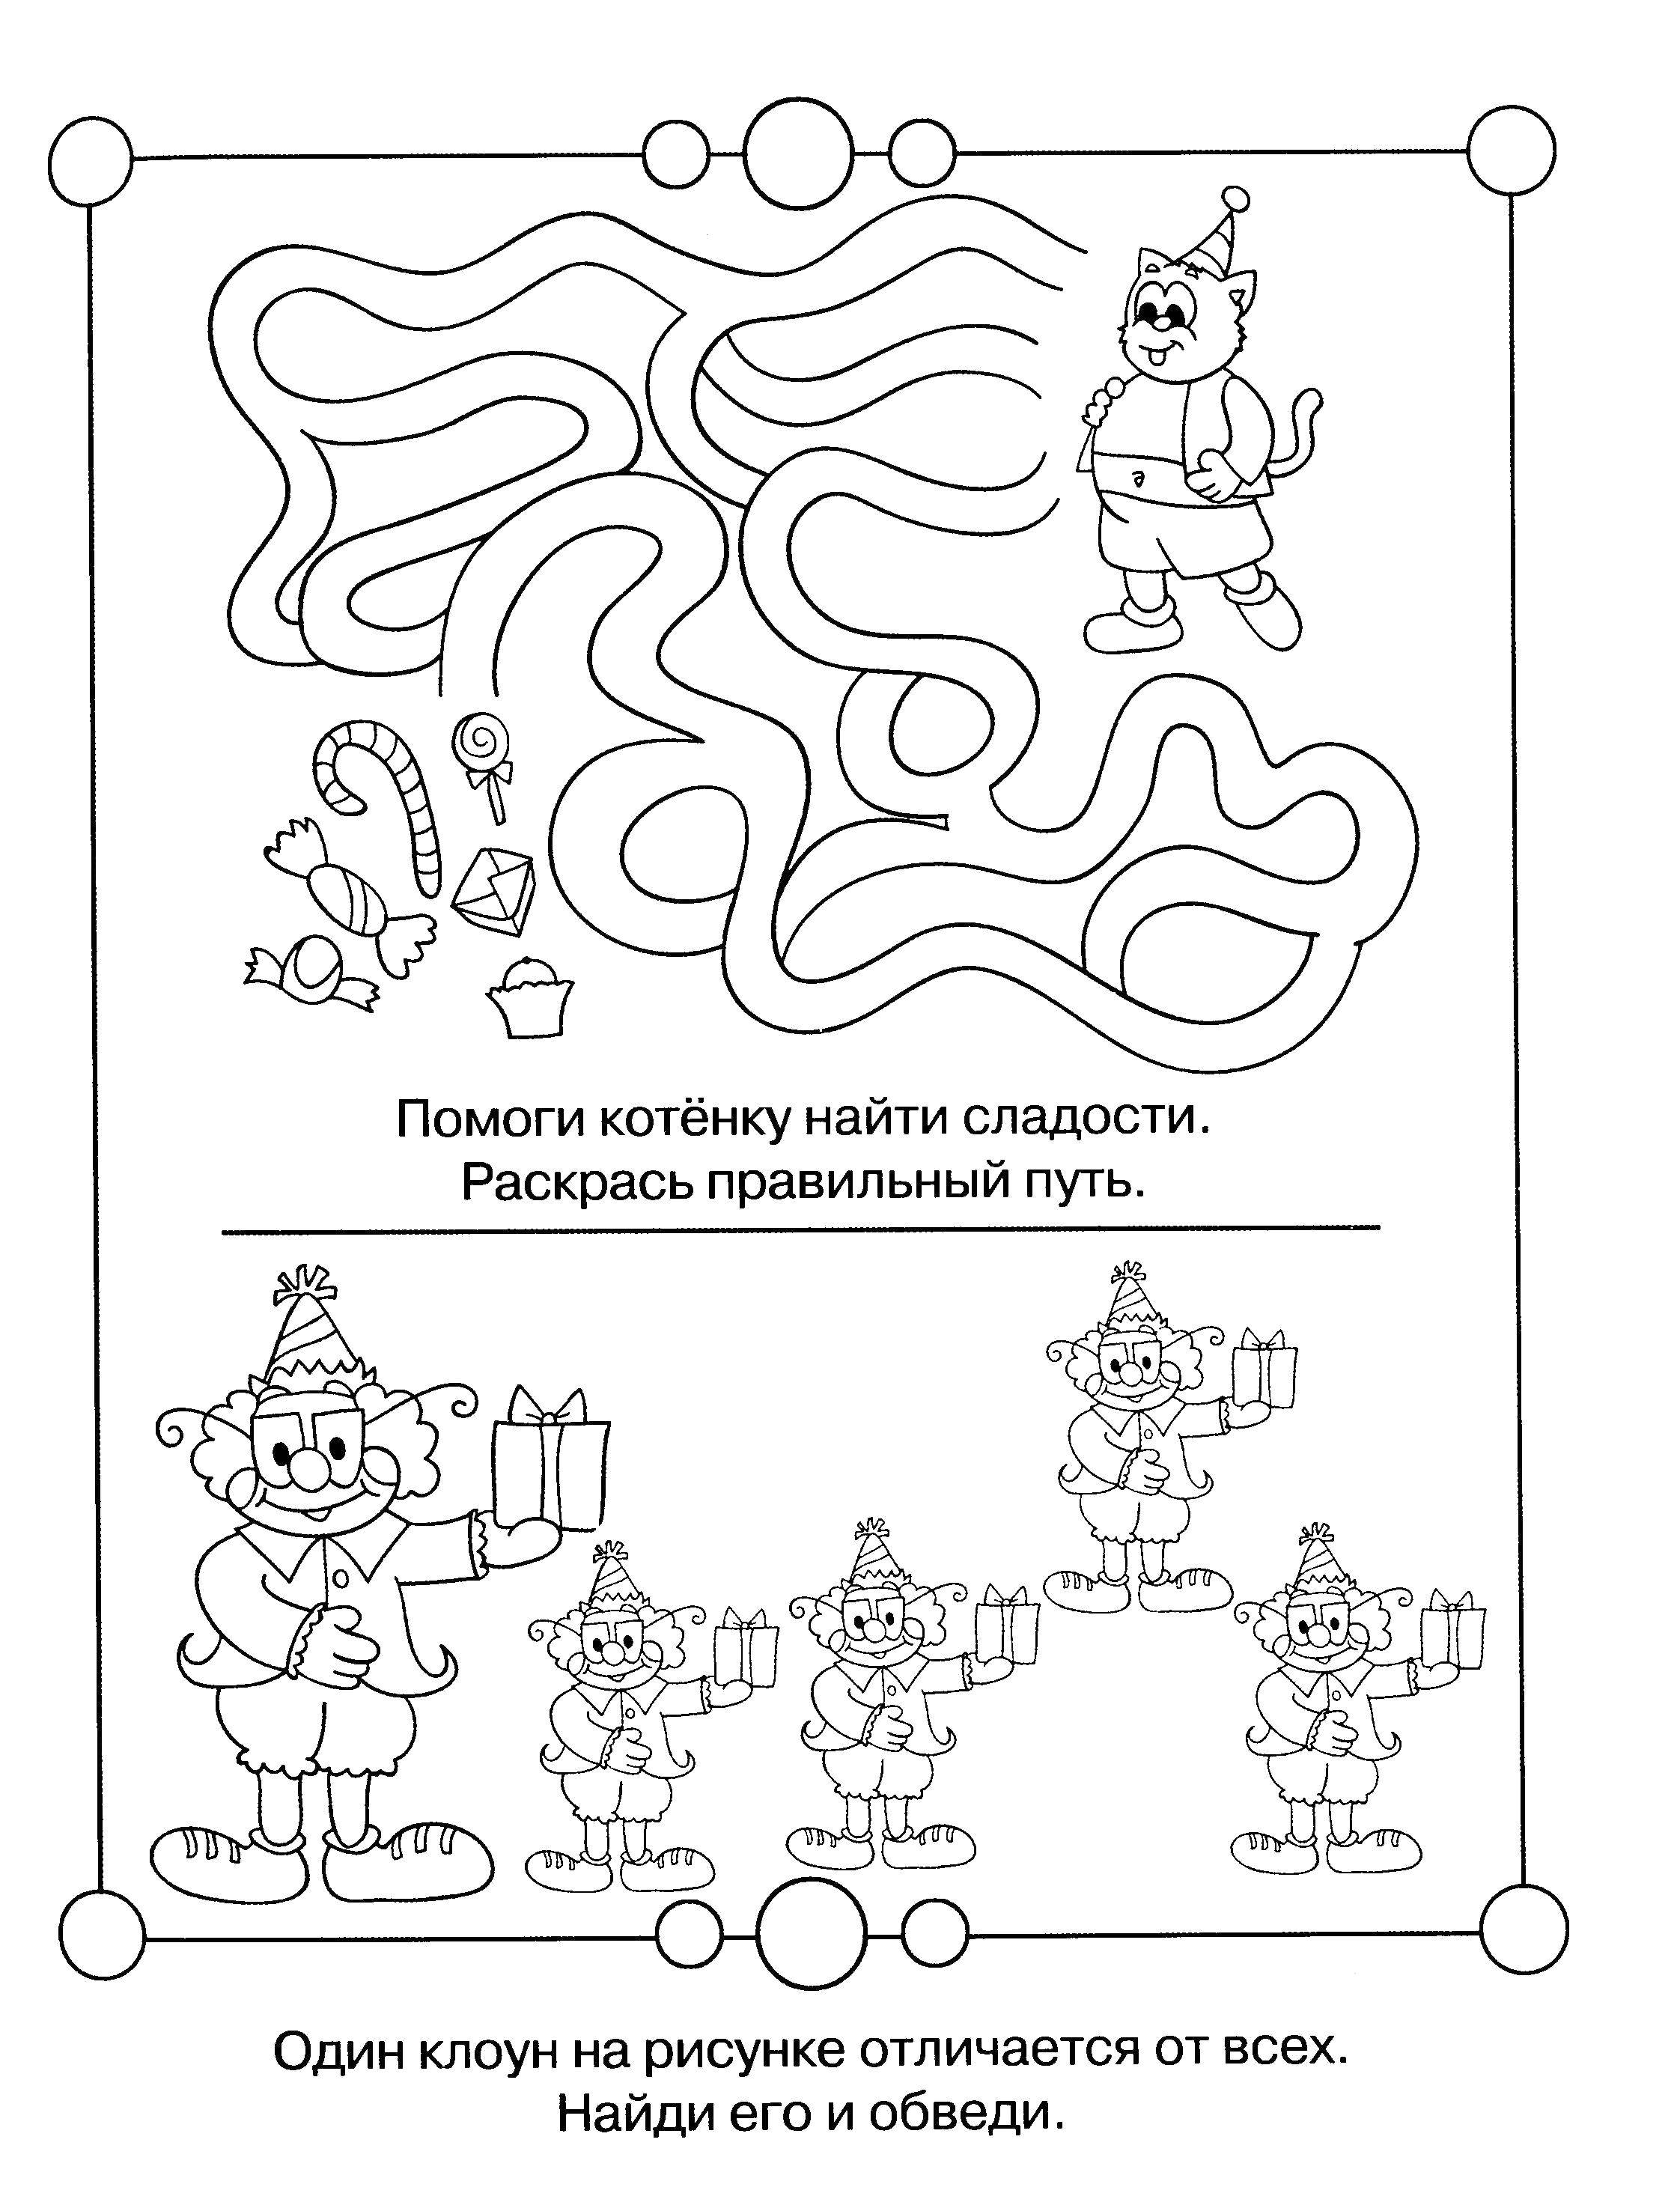 Coloring Help the kitten. Category riddles for kids. Tags:  Teaching coloring, logic.